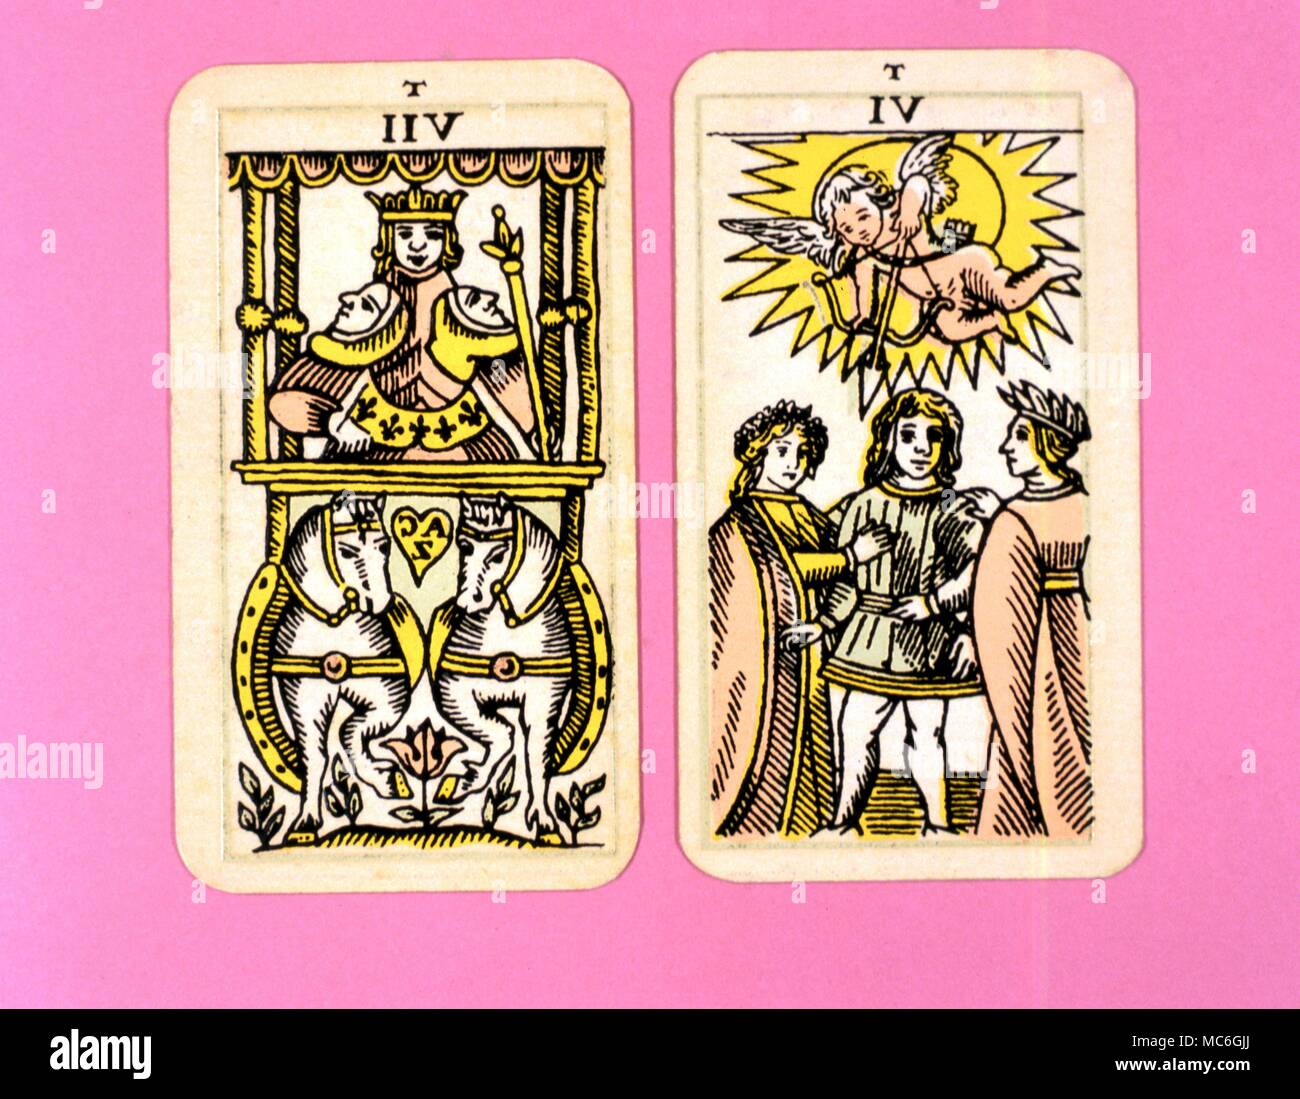 Tarot Cards-Majo Arcana- The Parisian Tarot. Card 6. The Lovers and Card 7.  The Chariot. Two cards from a Major Arcana picture Tarot, probably designed  in an archaizing style in loose imitation